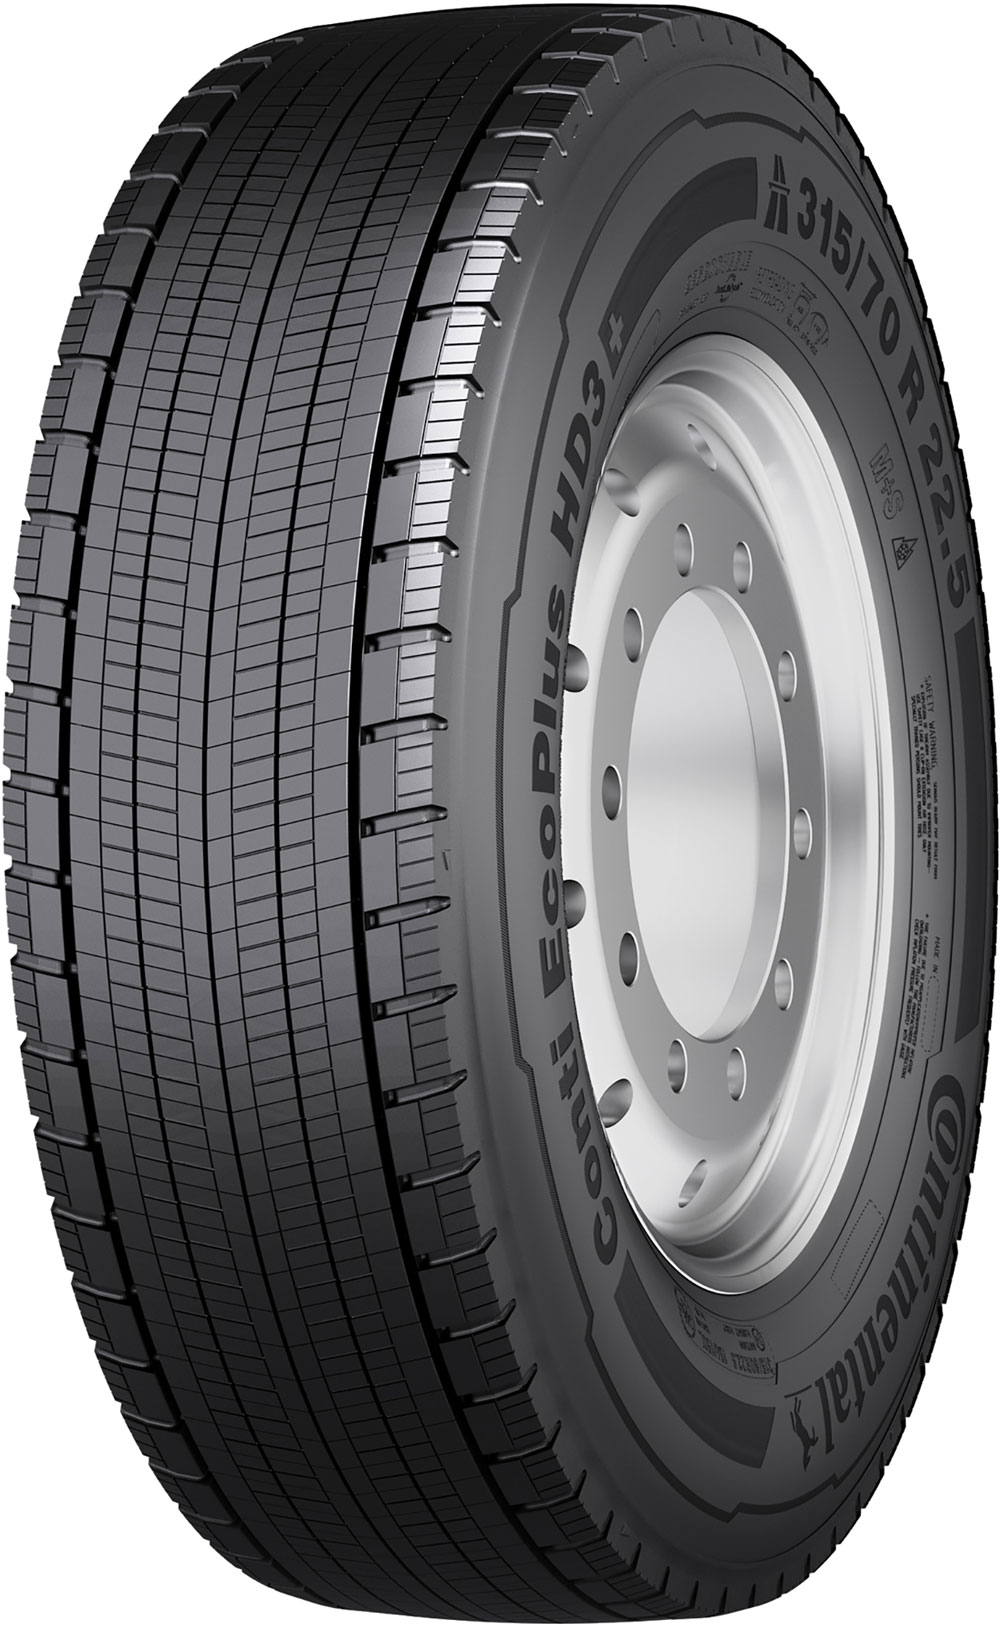 product_type-heavy_tires CONTINENTAL EcoPlus HD3 (CED3+) 18PR TL 295/60 R22.5 150P